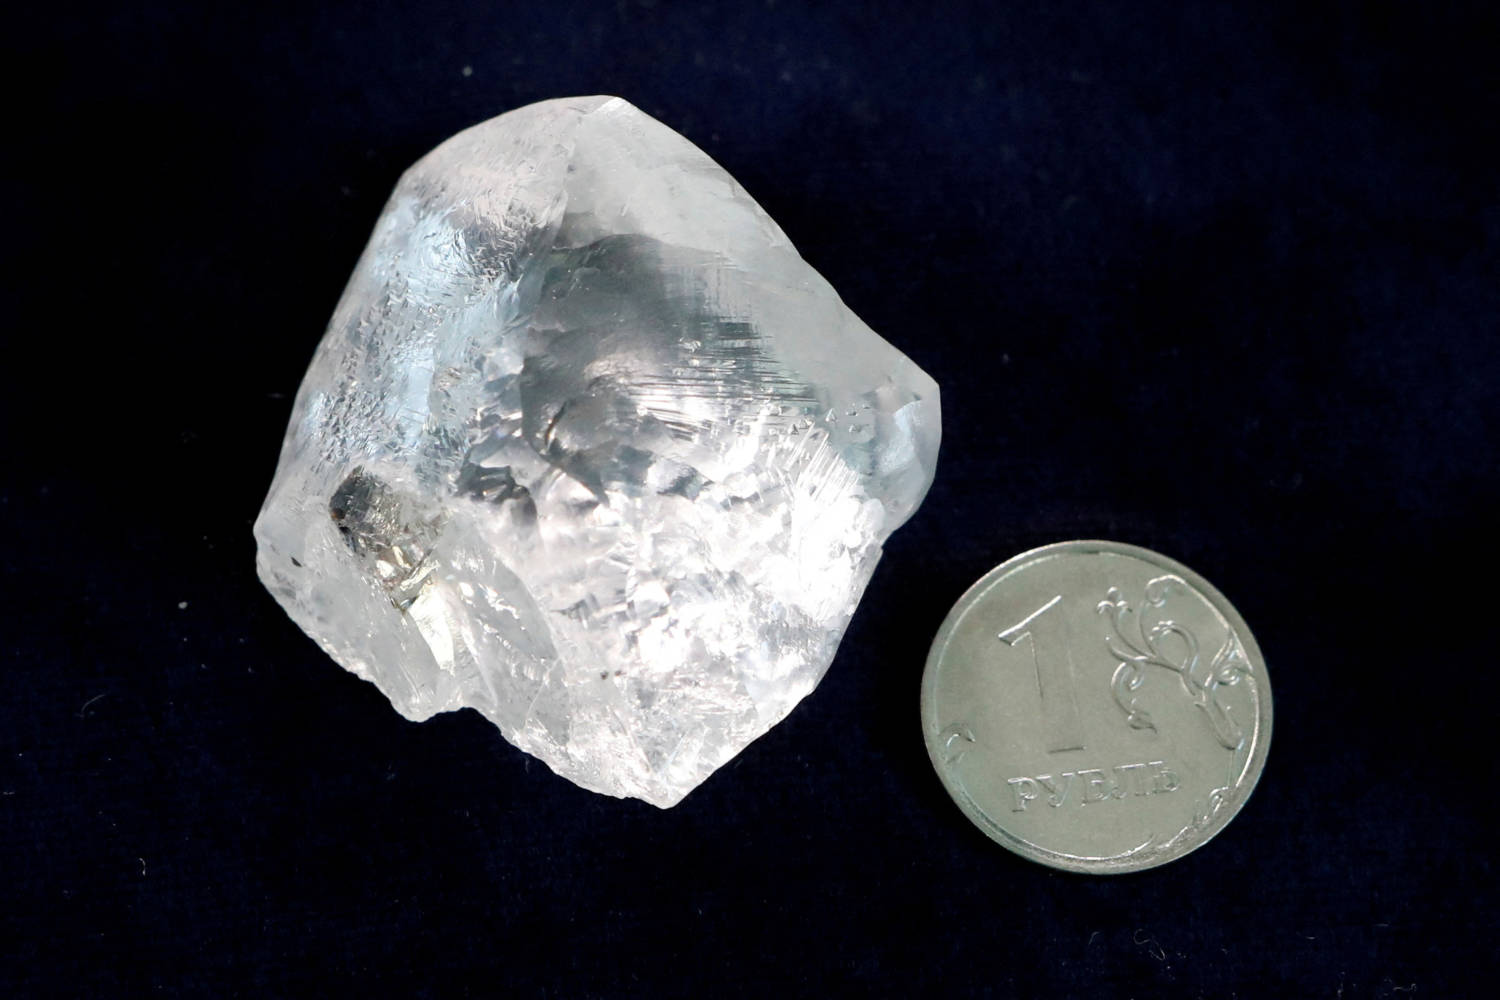 File Photo: A Rough Diamond Is Seen Next To A One Rouble Coin At The Polishing Affiliate Of Russian Diamond Producer Alrosa In Moscow, Russia